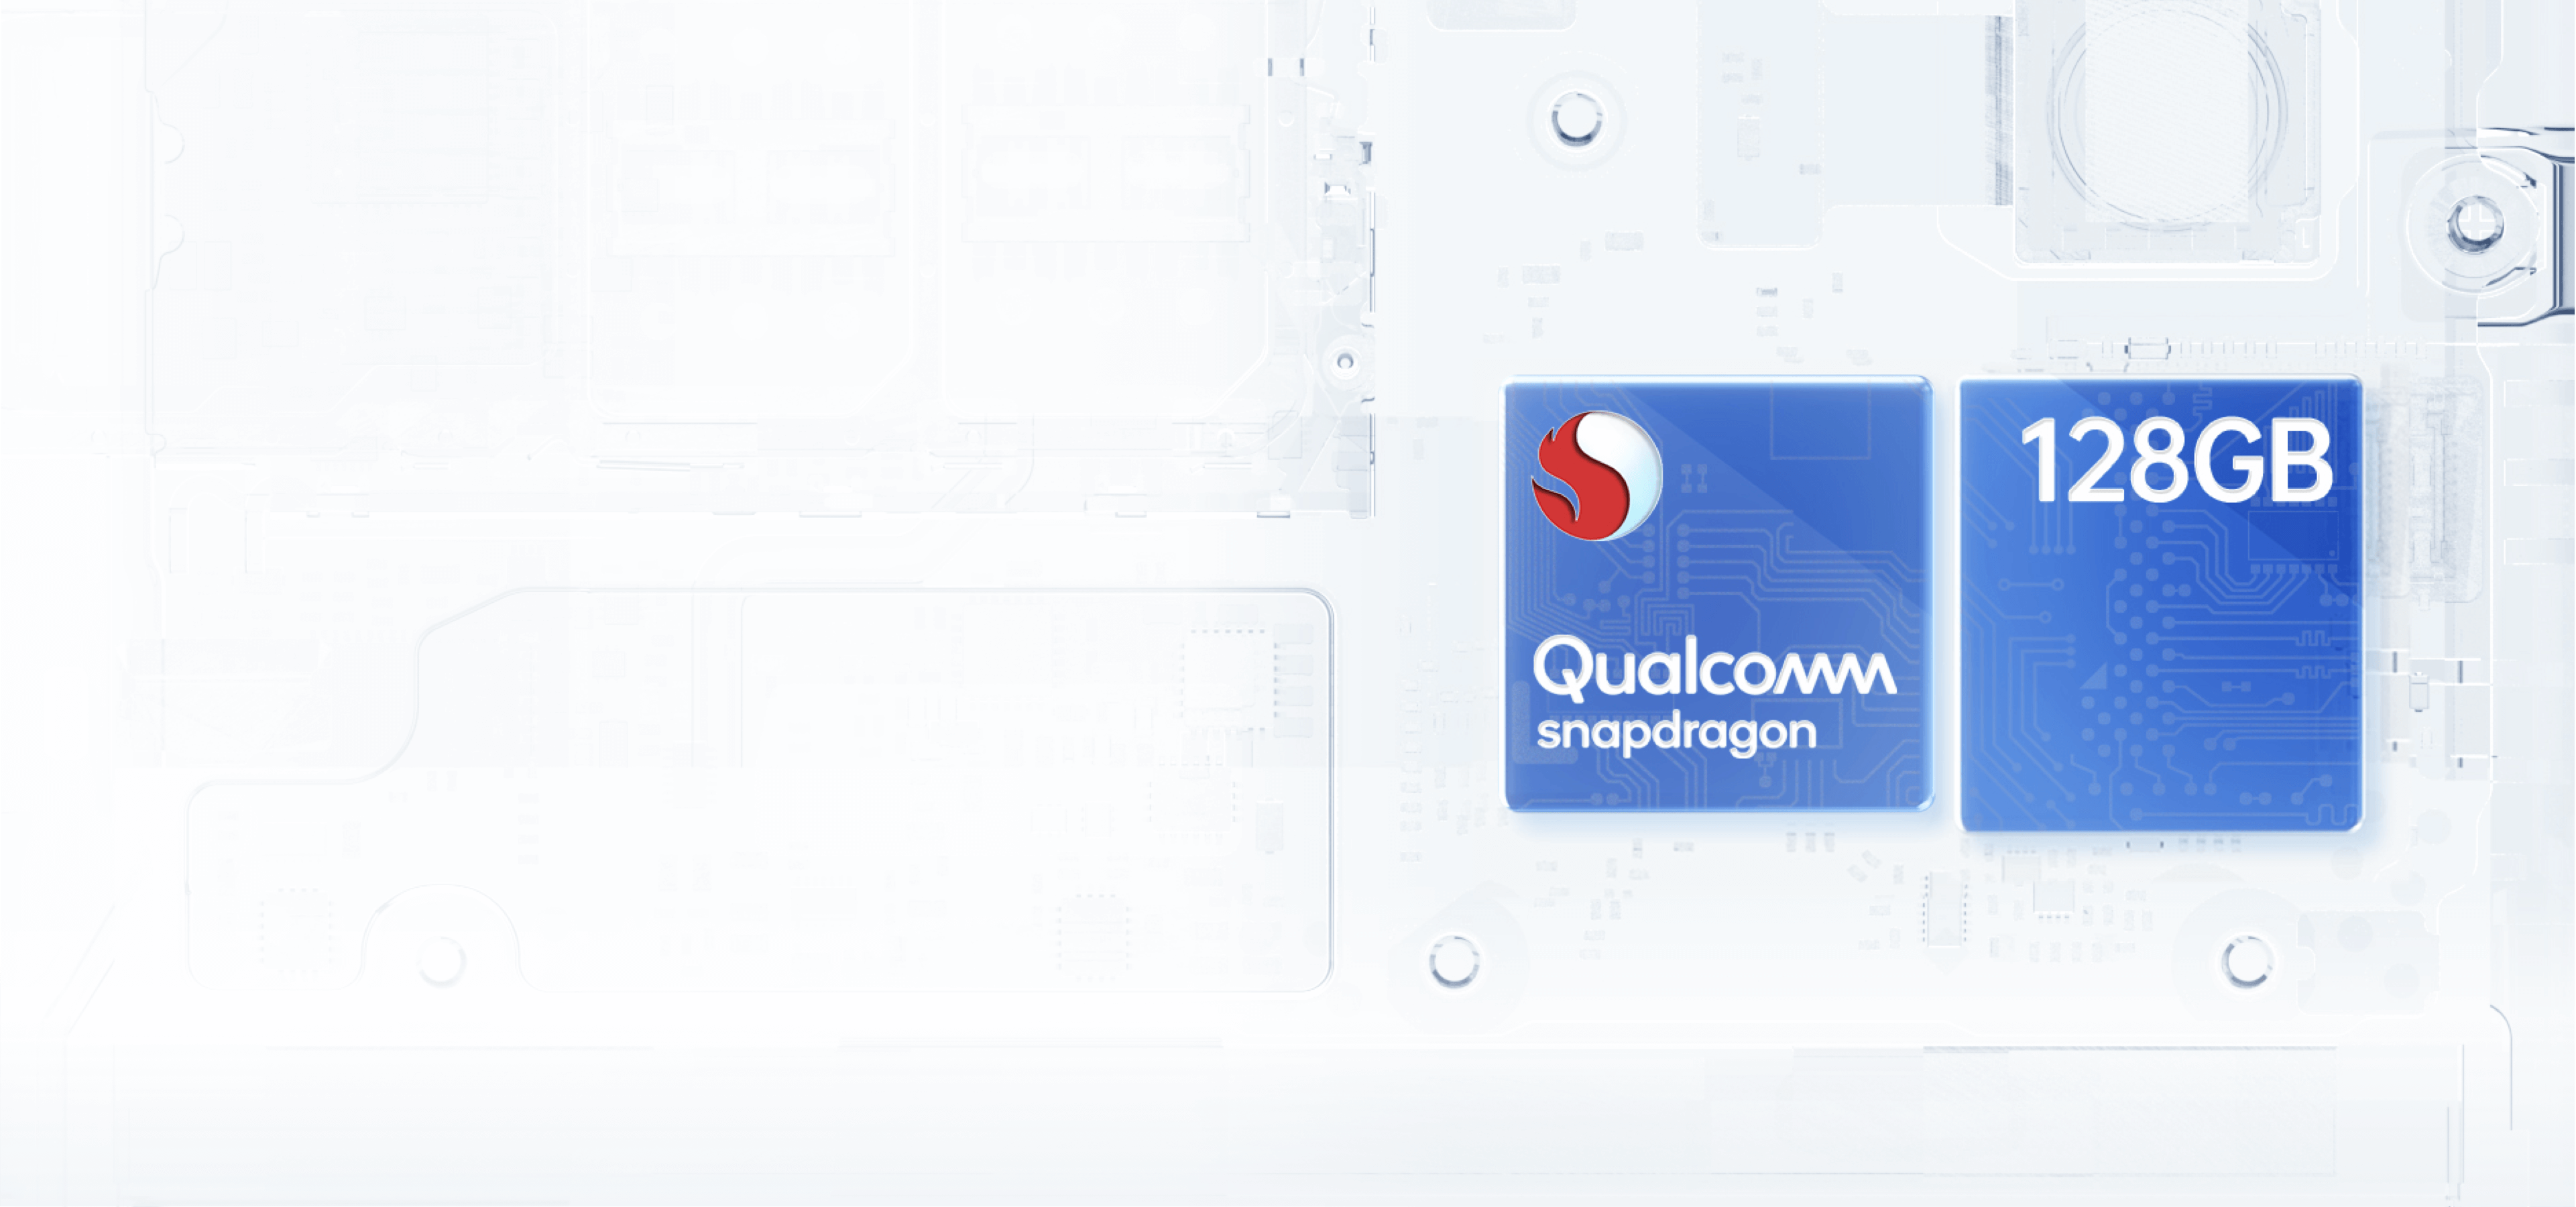 OPPO A53 Qualcomm Snapdragon